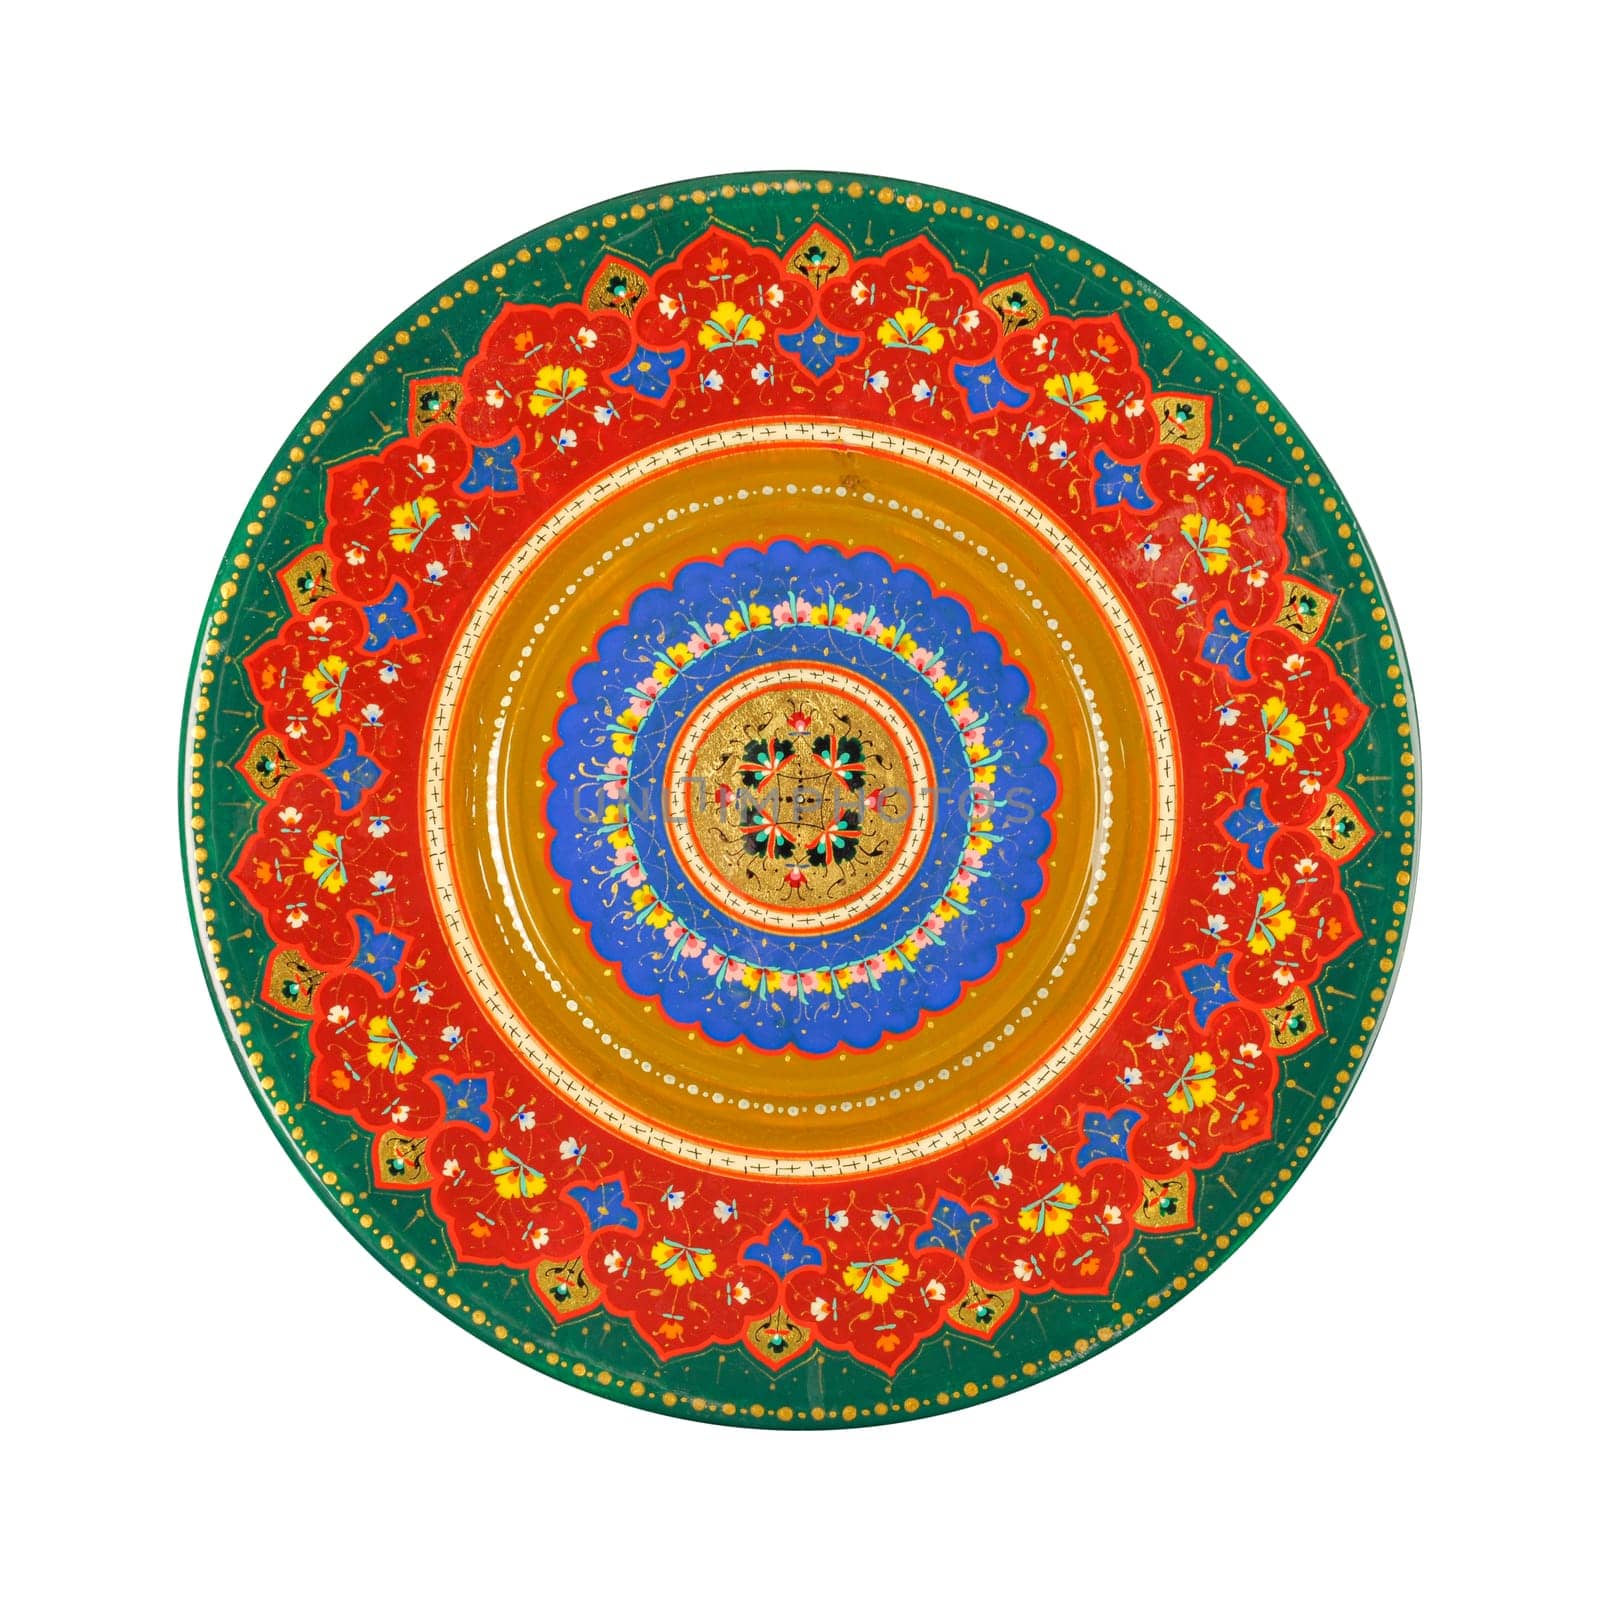 A top view of an oriental ceramic plate with a floral pattern on a white background, Uzbekistan by A_Karim